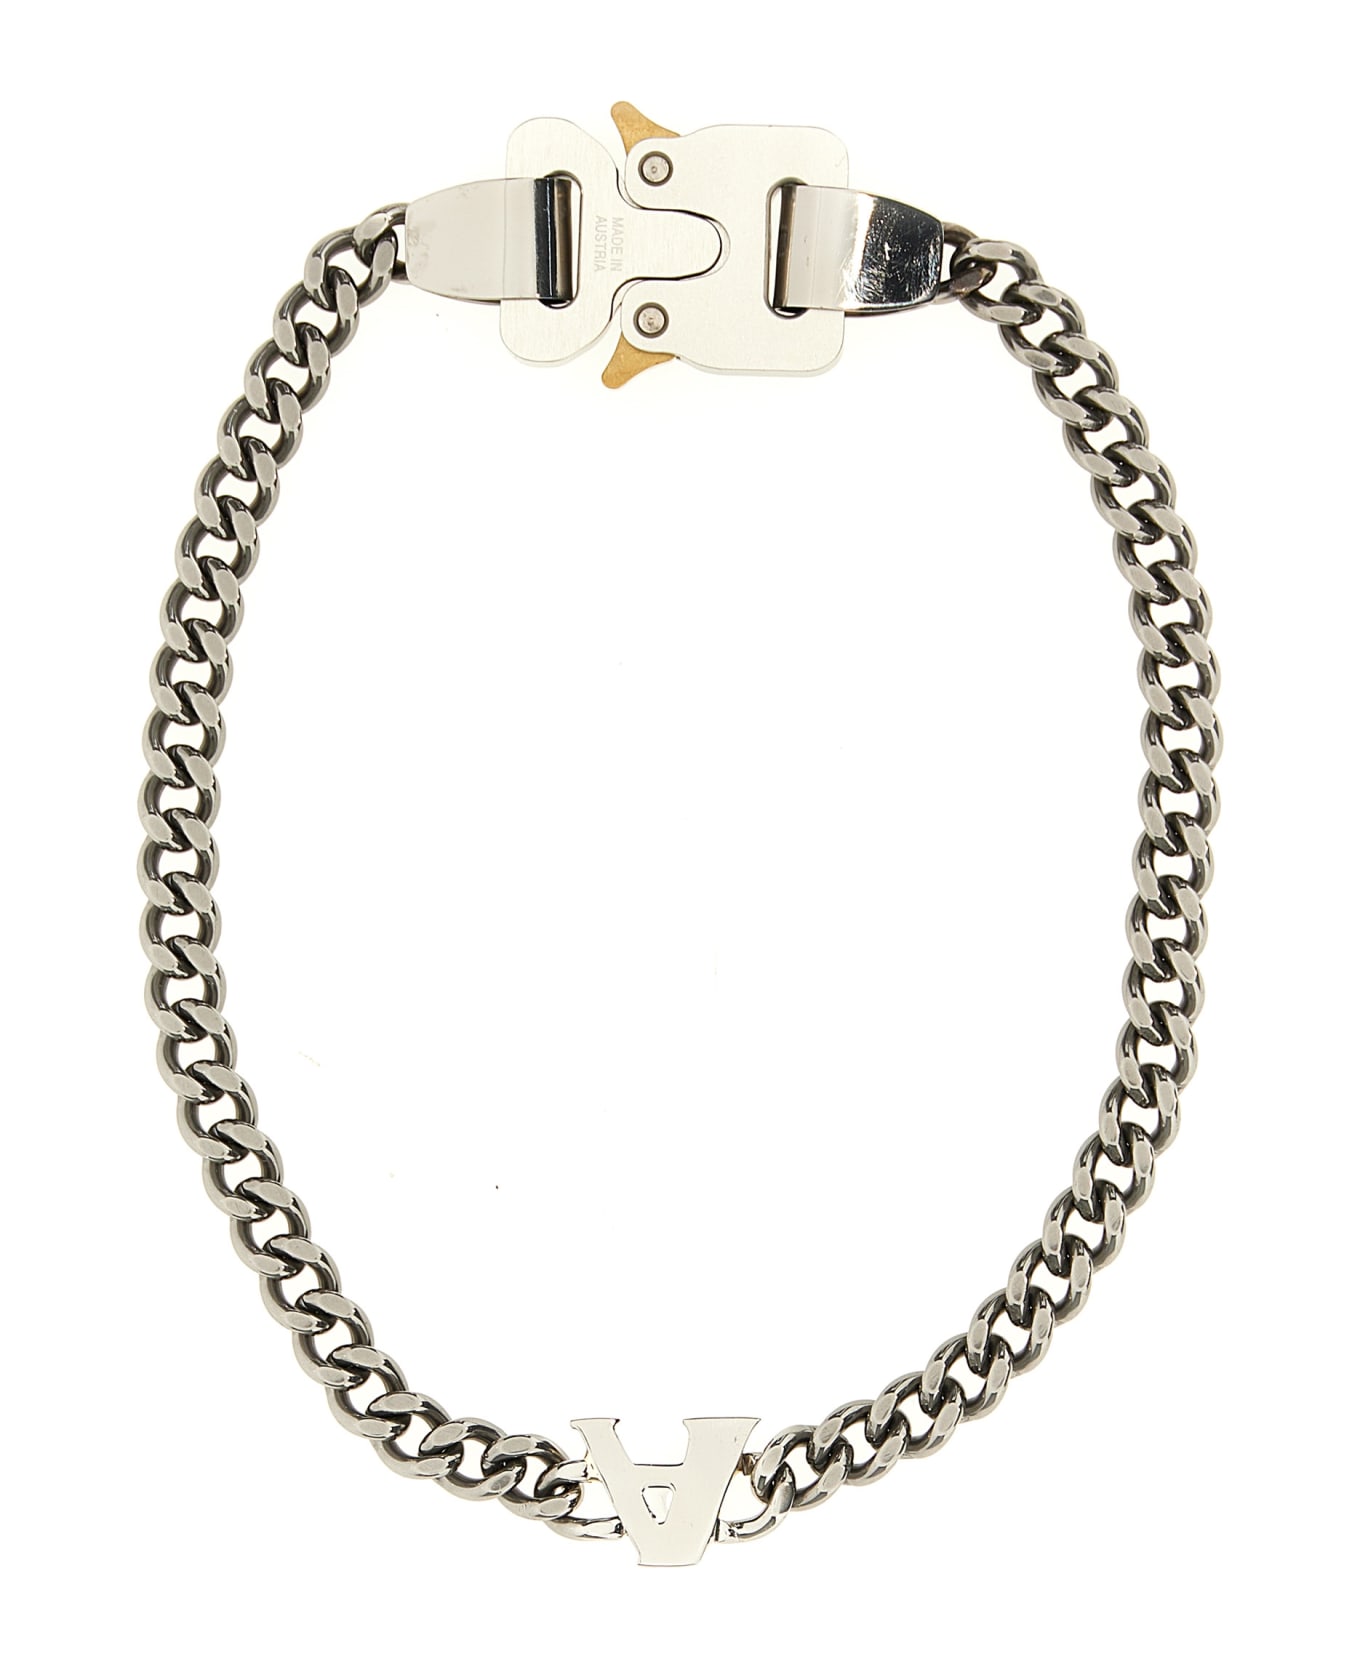 1017 ALYX 9SM Buckle Necklace - Silver ネックレス